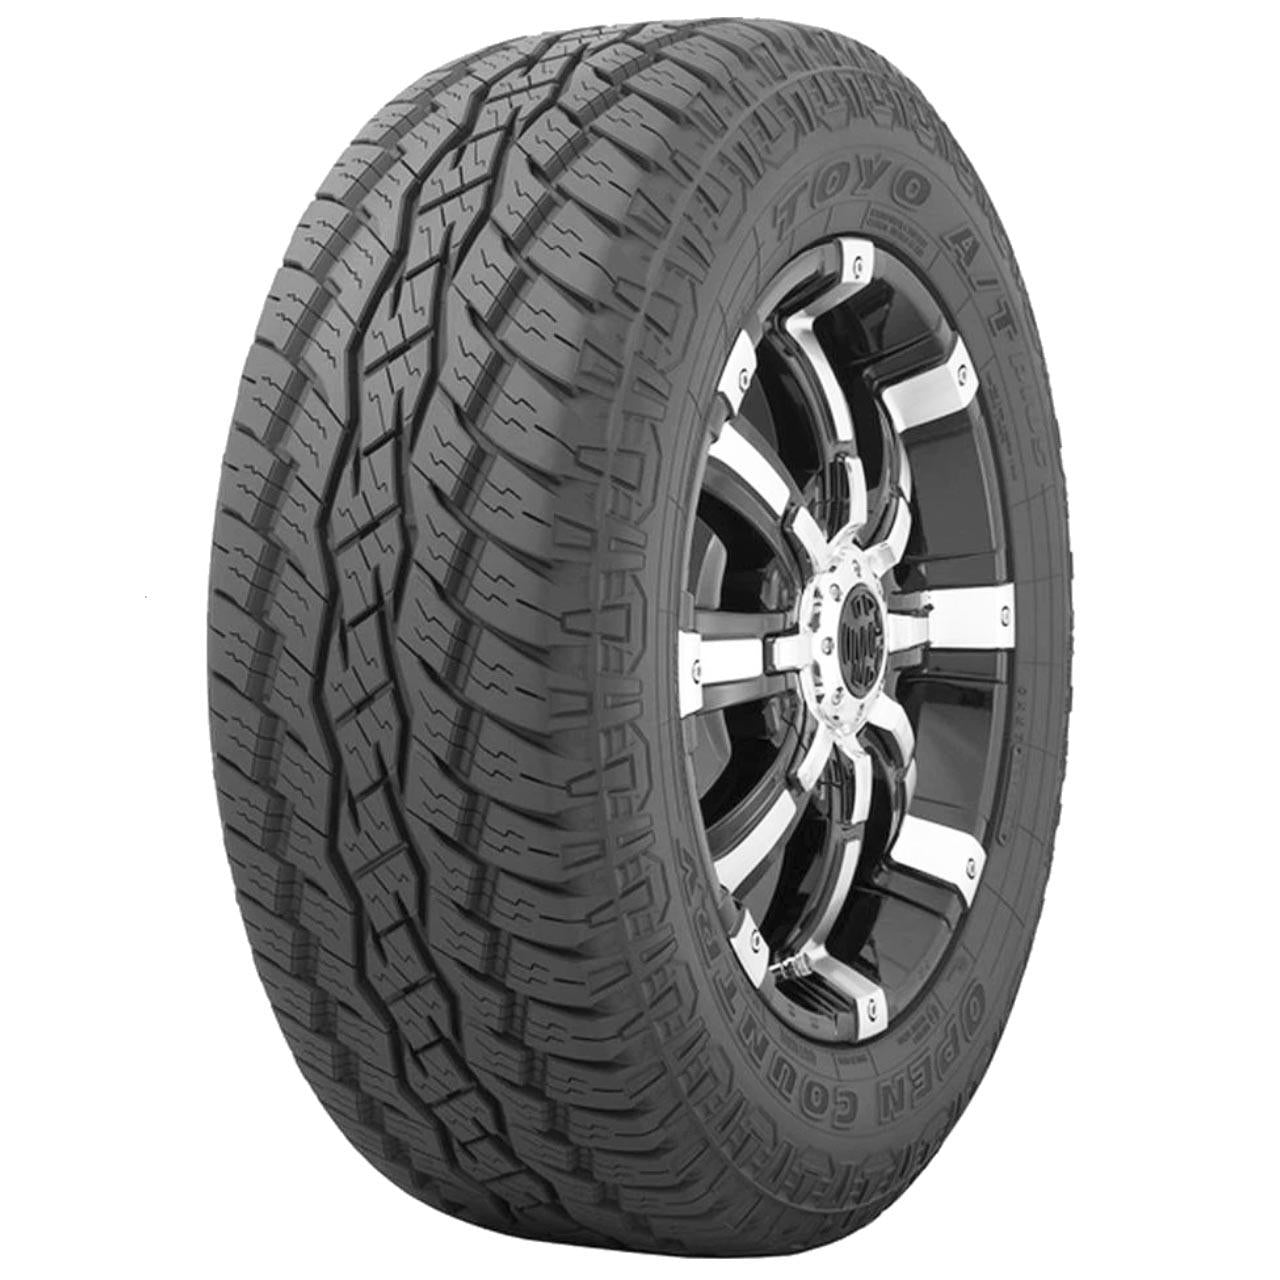 TOYO OPEN COUNTRY AT PLUS 225/75 R16 104T  TL M+S